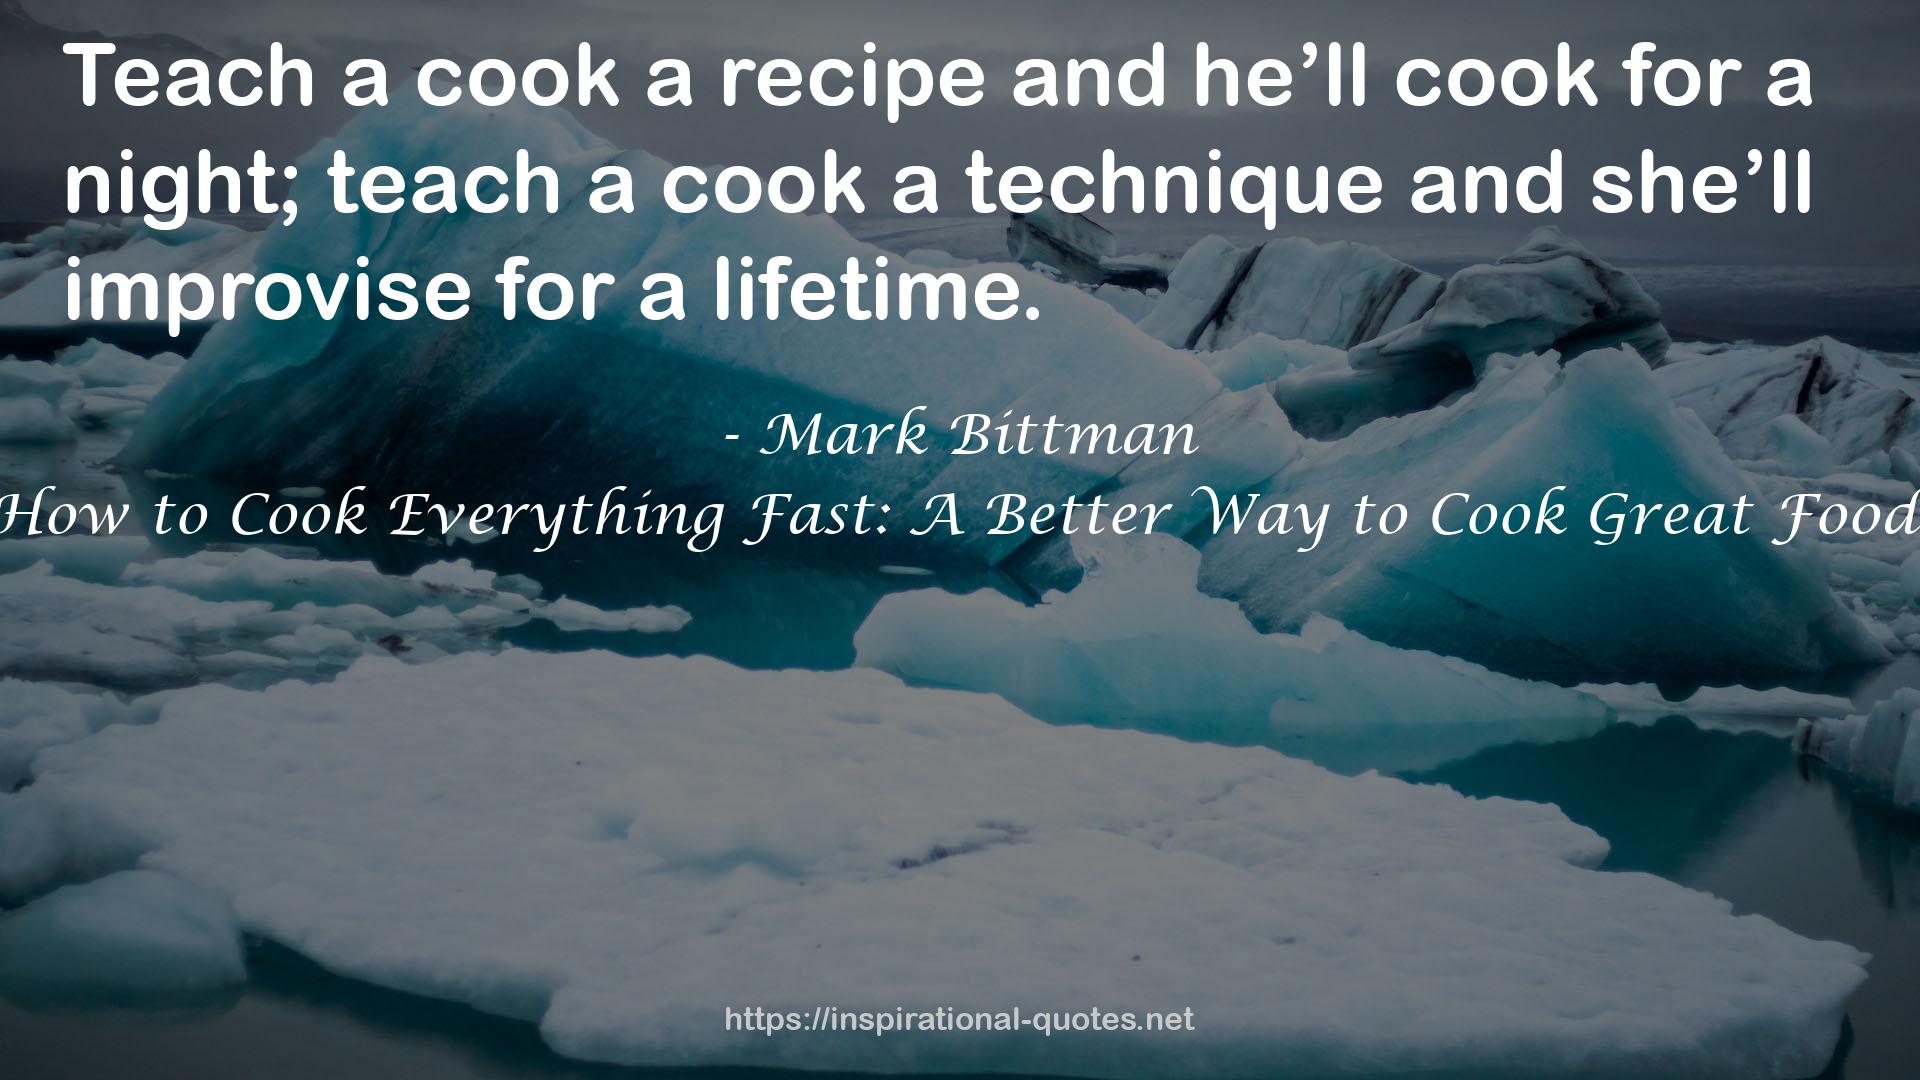 How to Cook Everything Fast: A Better Way to Cook Great Food QUOTES